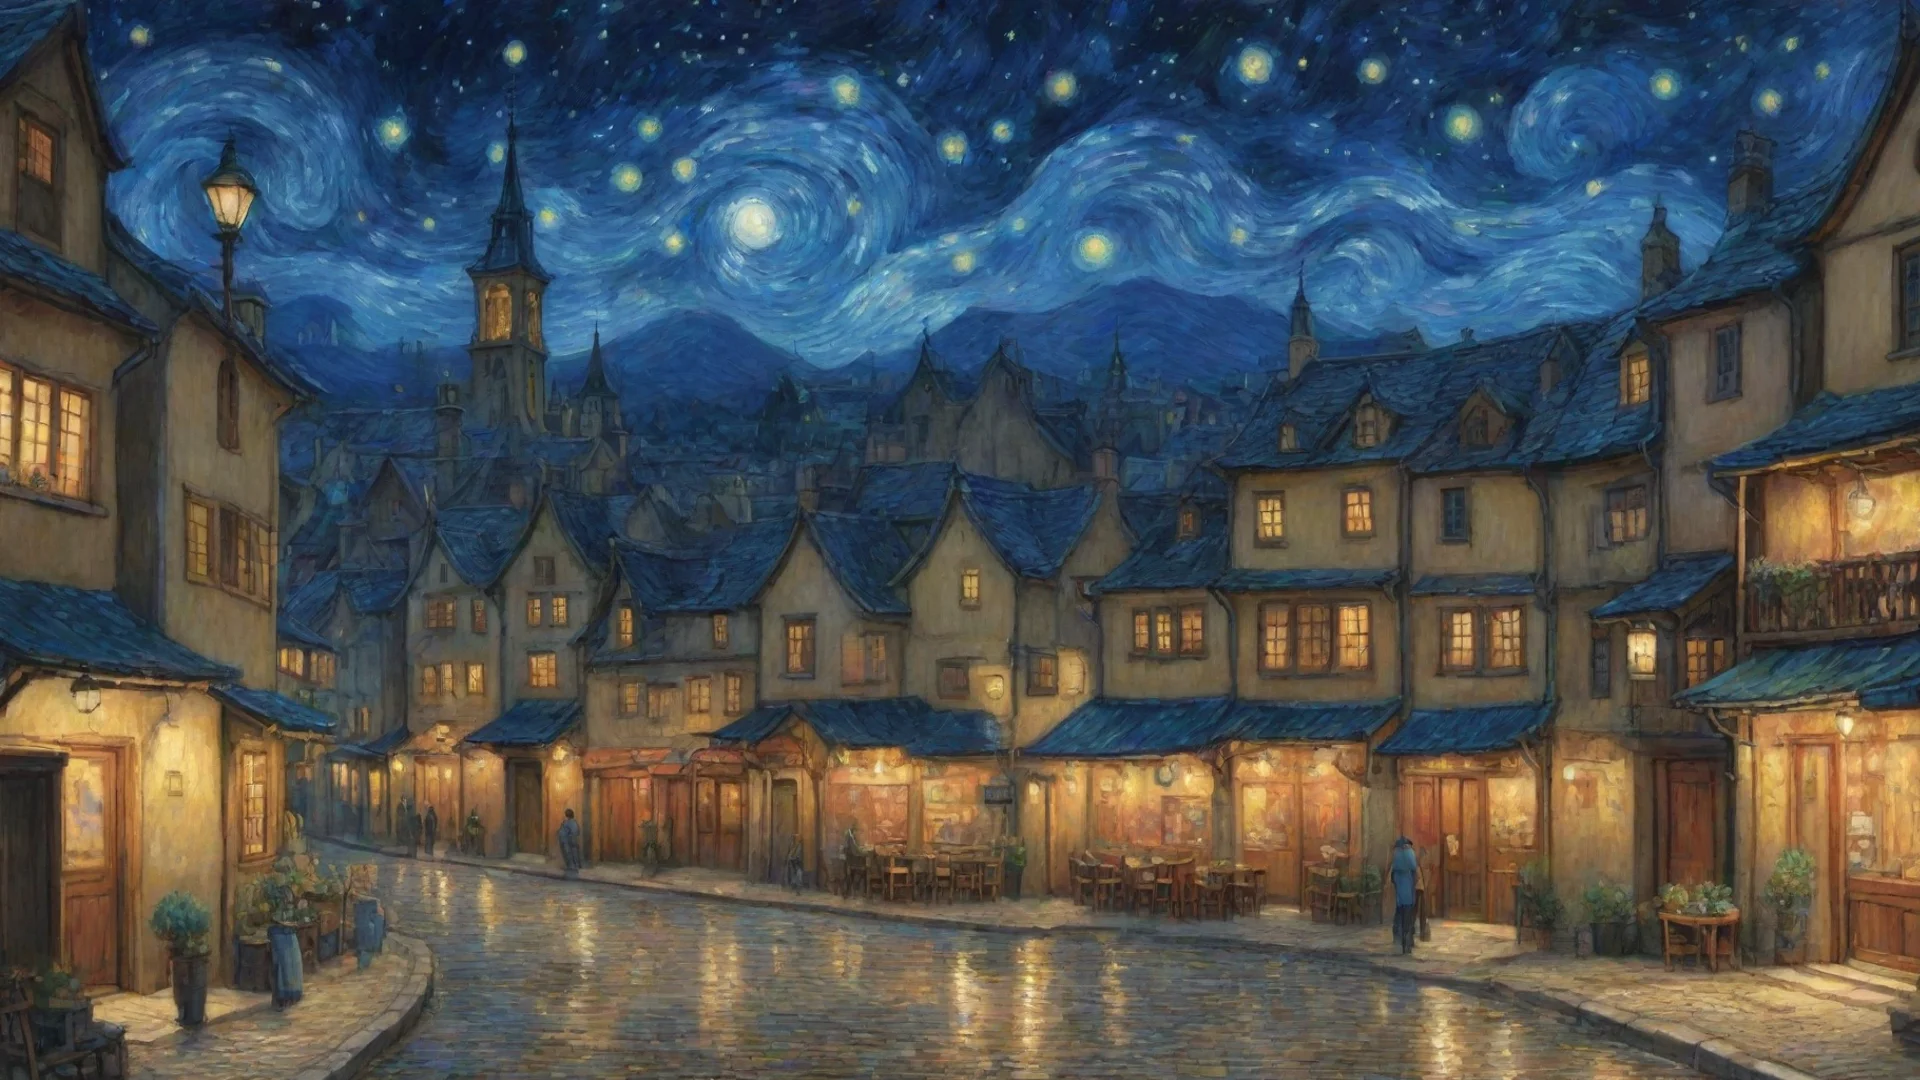 amazing epic lovely artistic ghibli van gogh stary night anime town detailed asthetic awesome portrait 2 wide